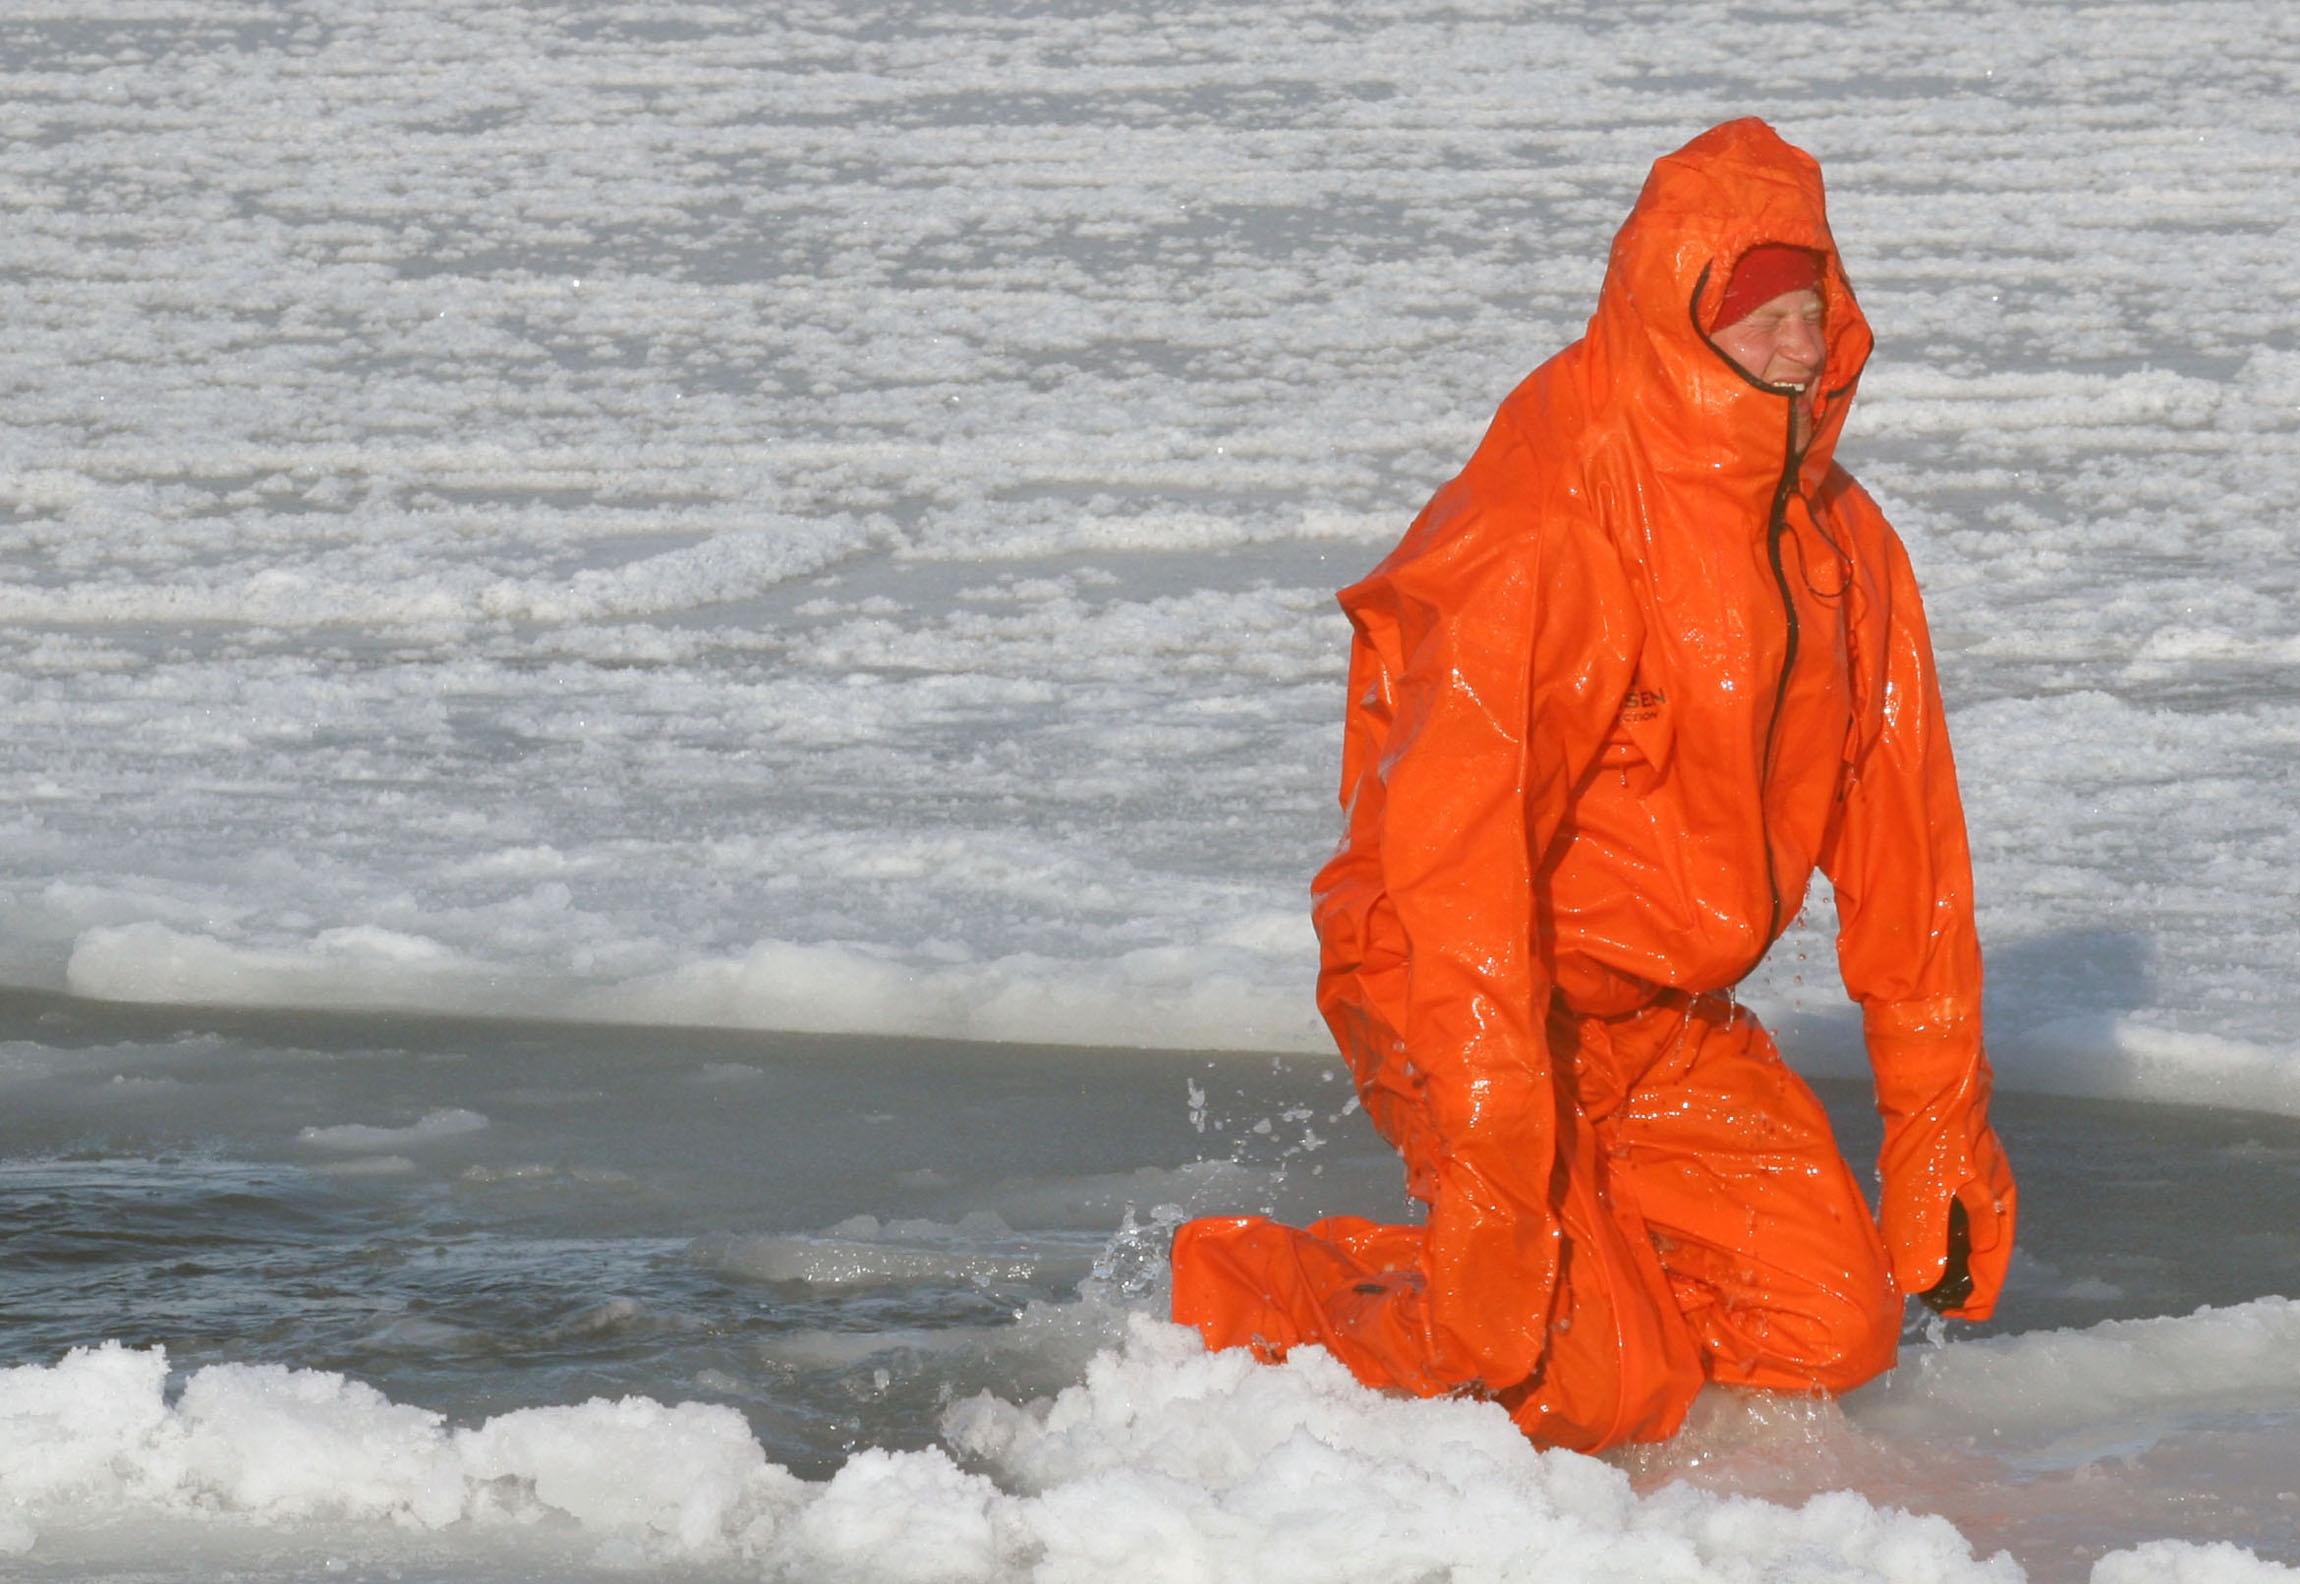 Britain's Prince Harry tries wearing an immersion suit on the island of Spitsbergen, between the Norwegian mainland and the North Pole